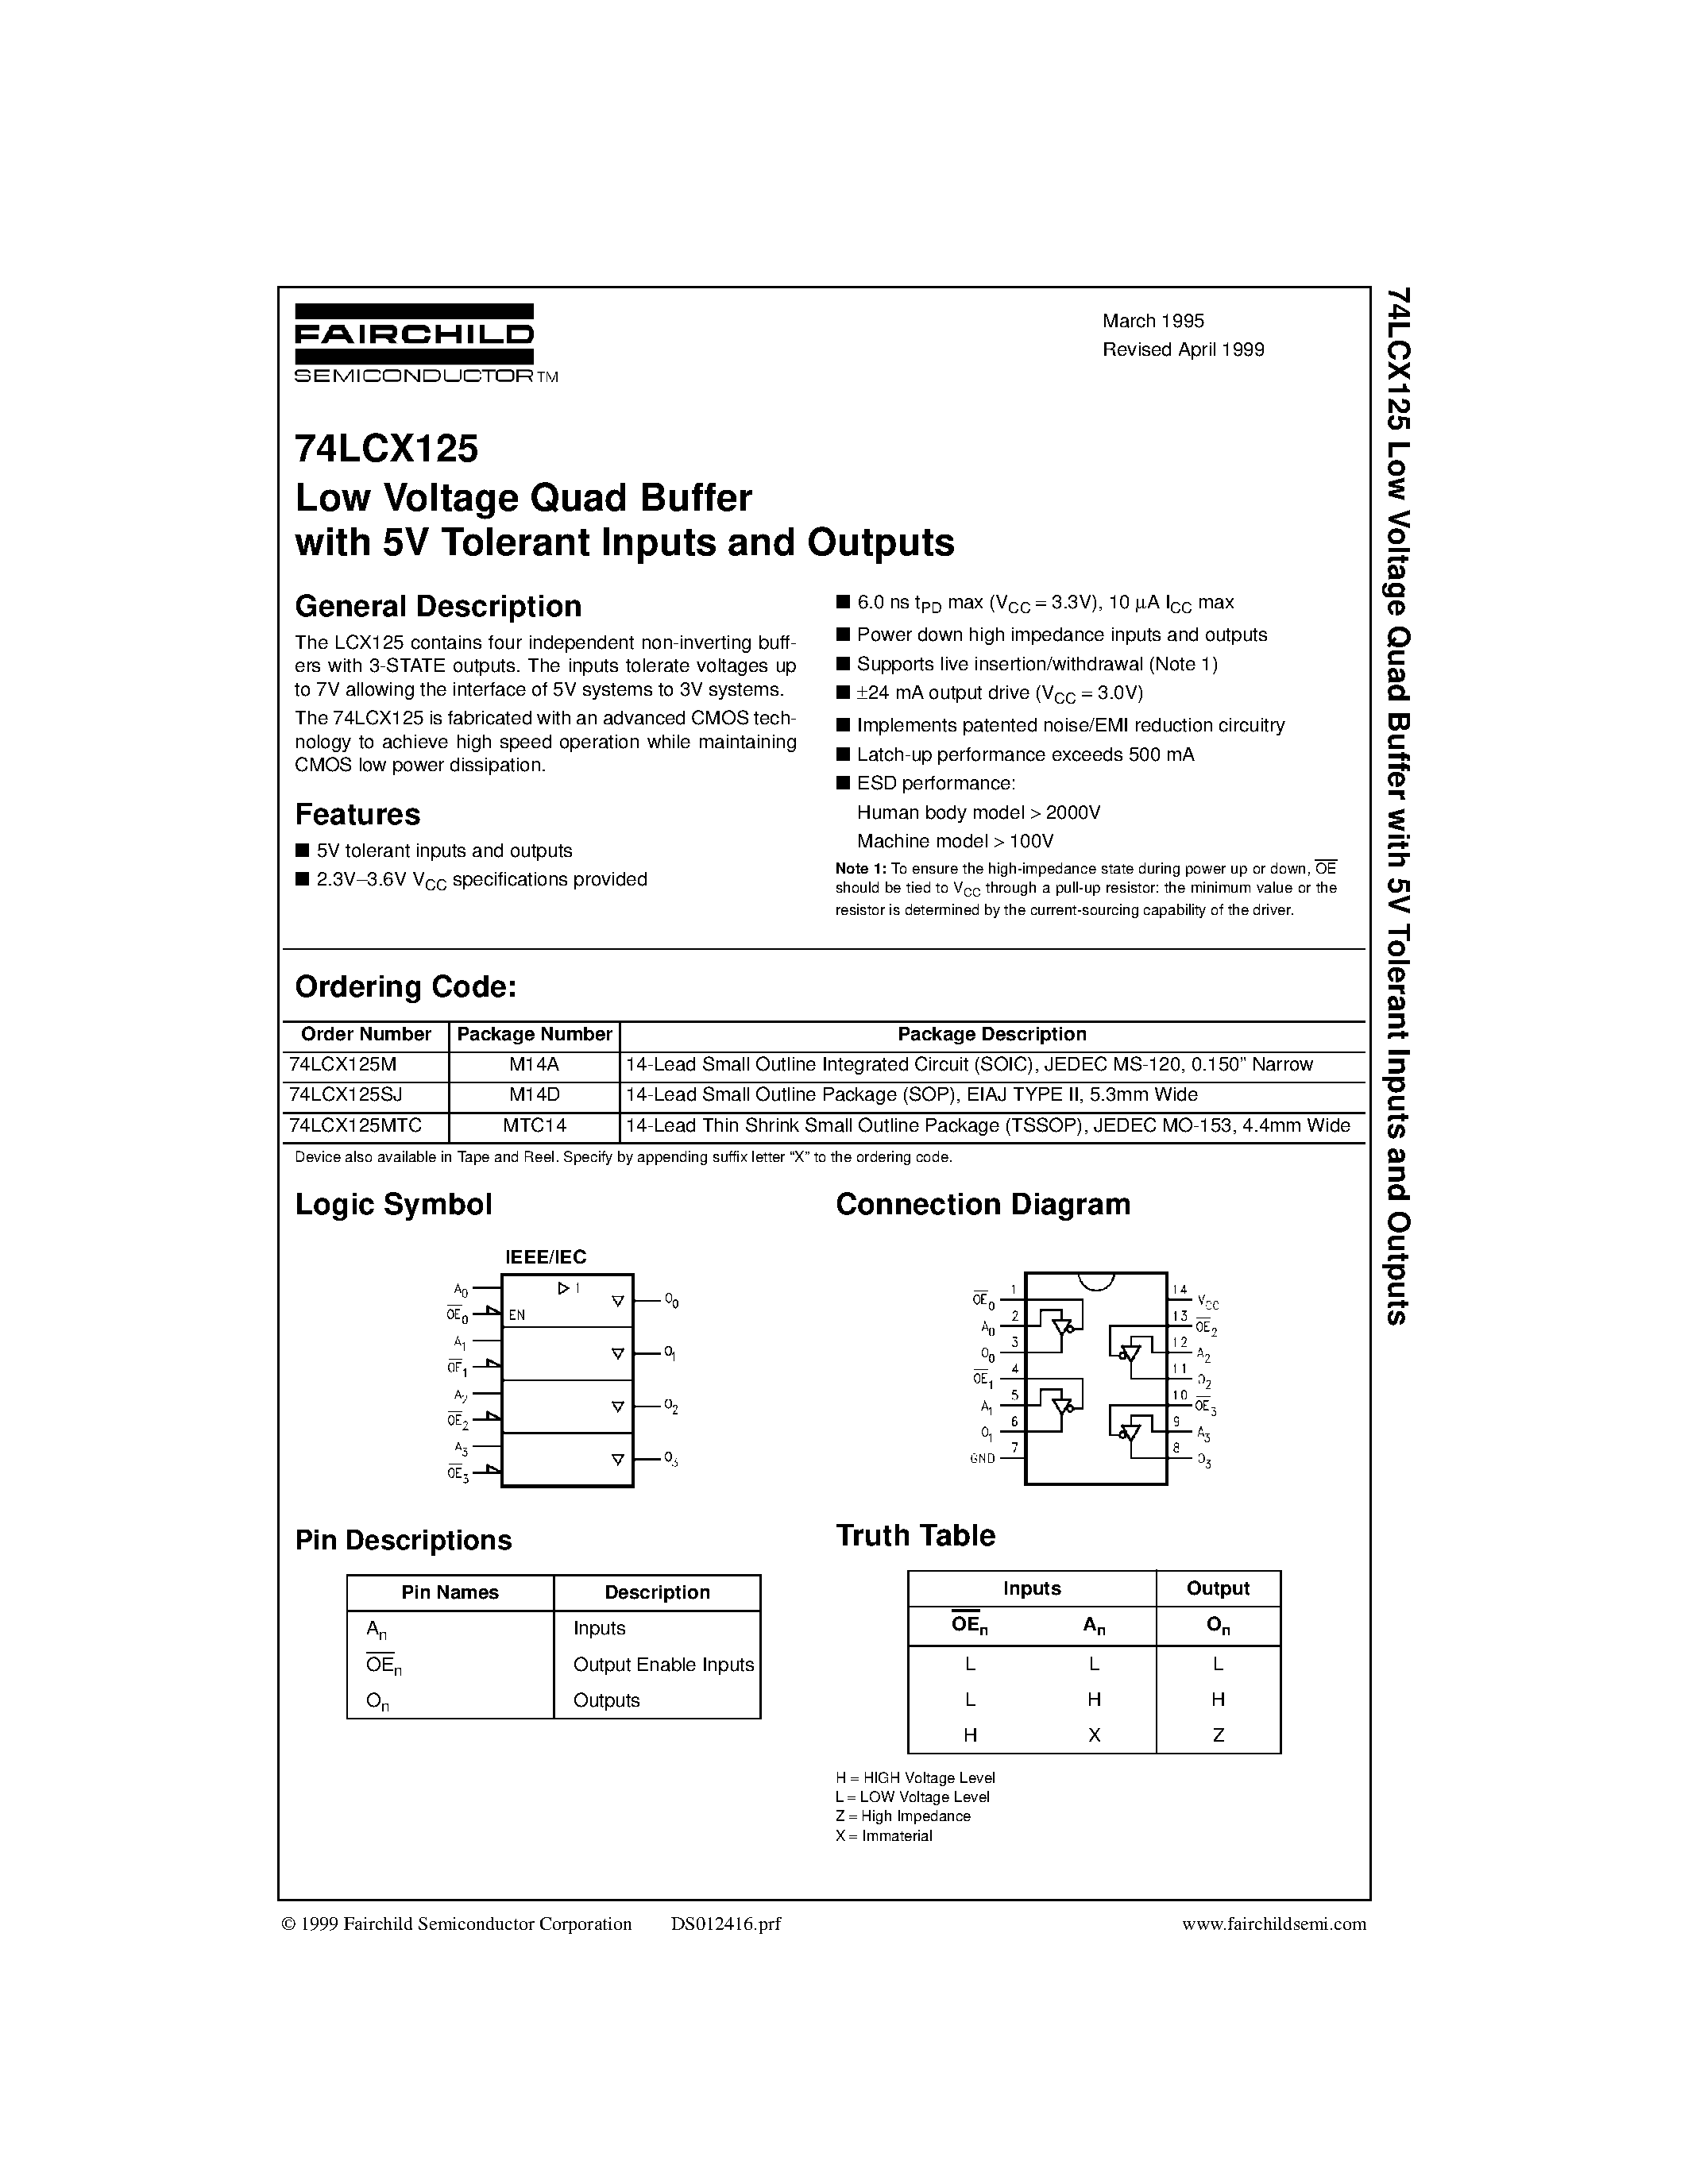 Datasheet 74LCX125SJ - Low Voltage Quad Buffer with 5V Tolerant Inputs and Outputs page 1